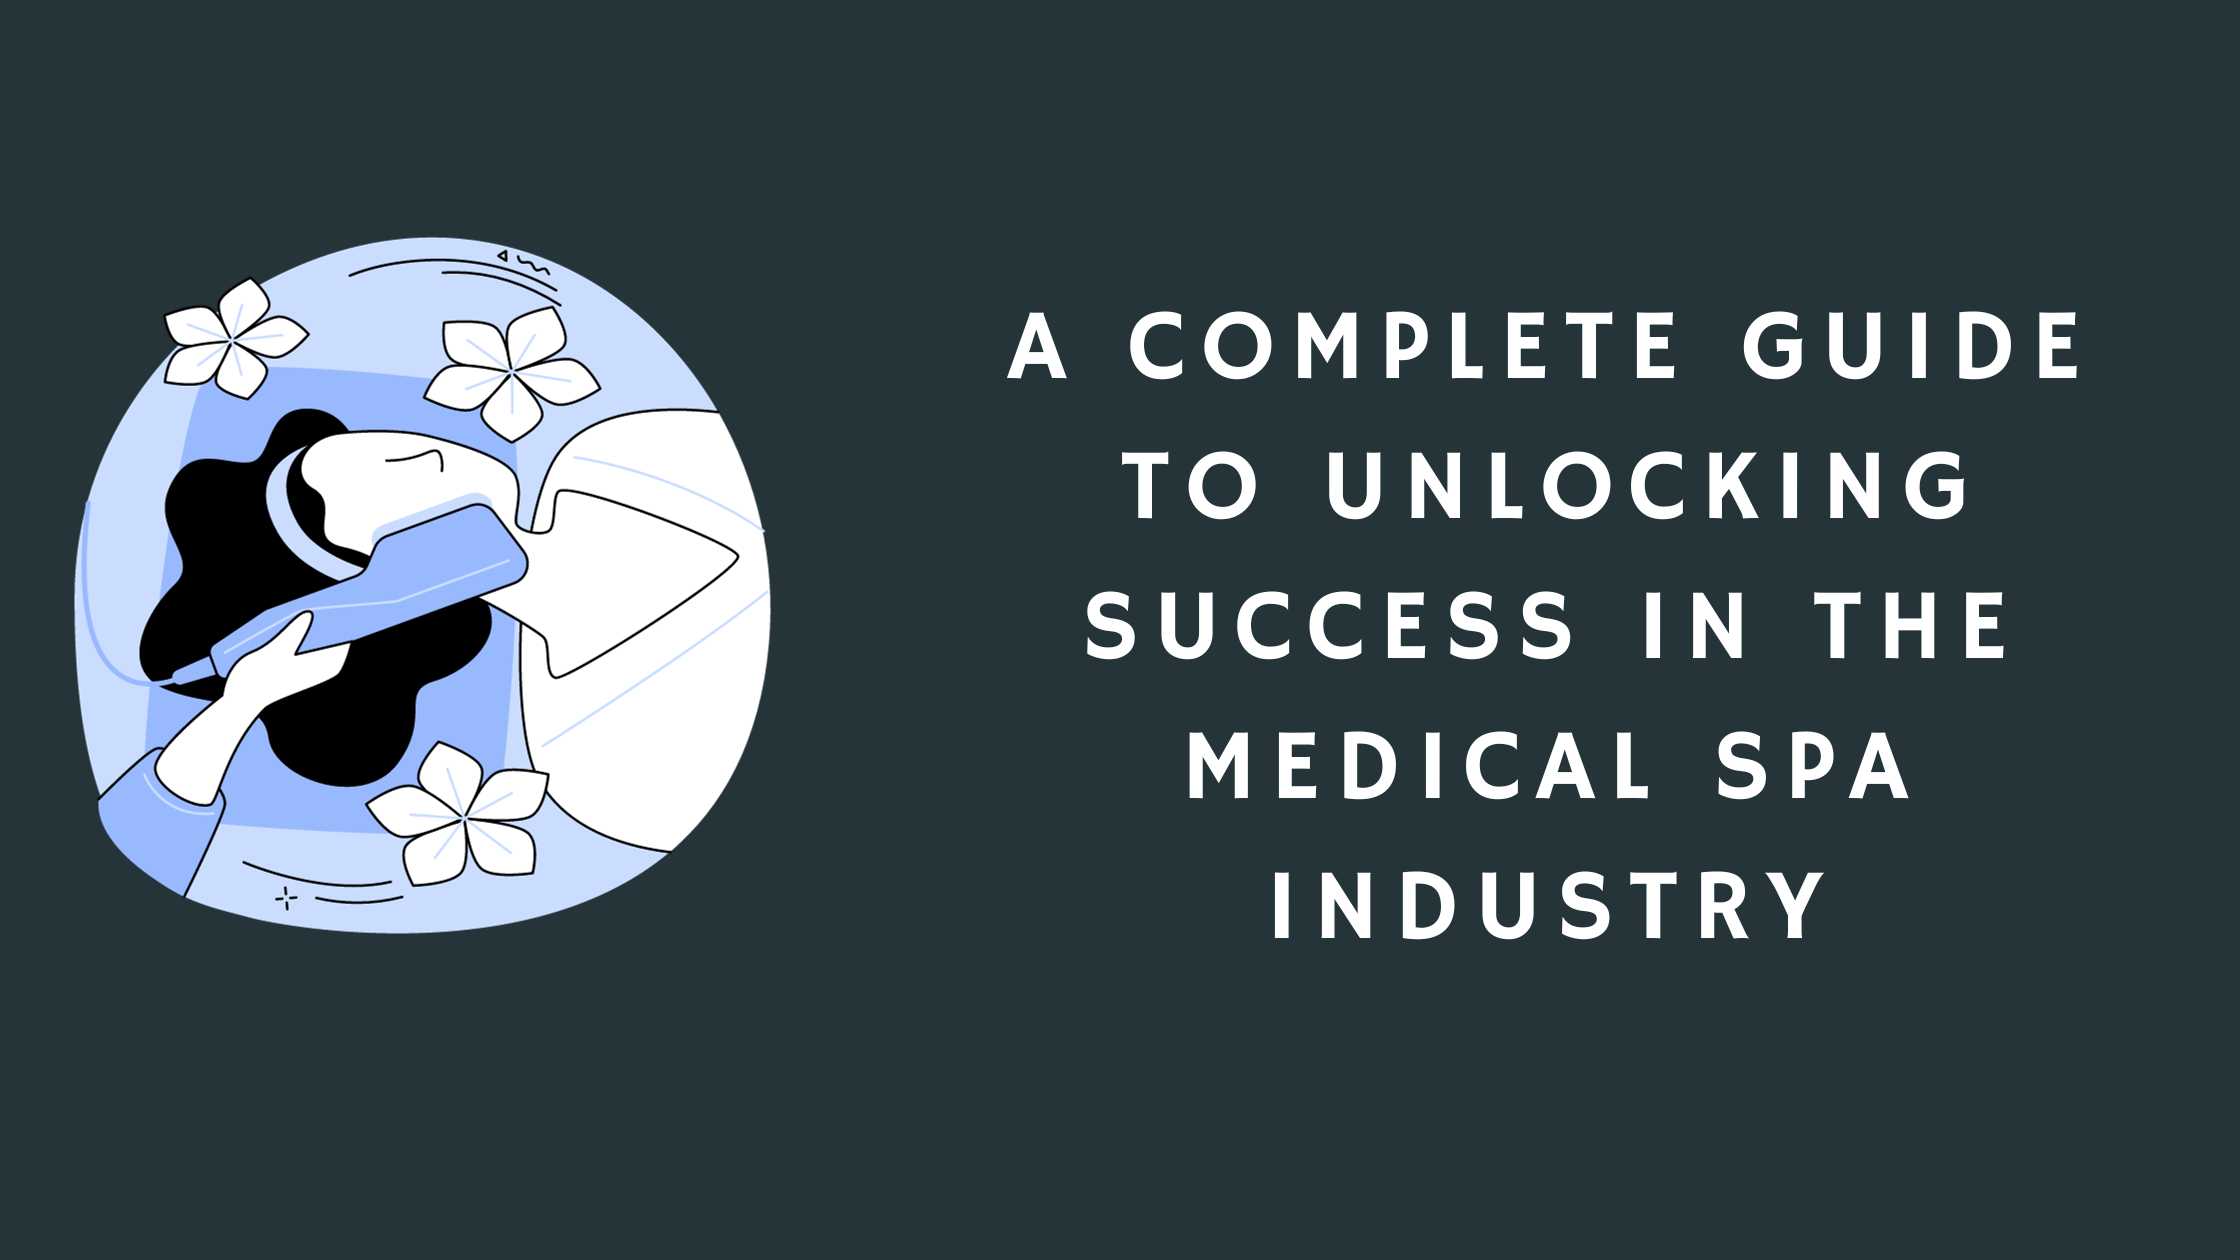 A Complete Guide to Unlocking Success in the Medical Spa Industry